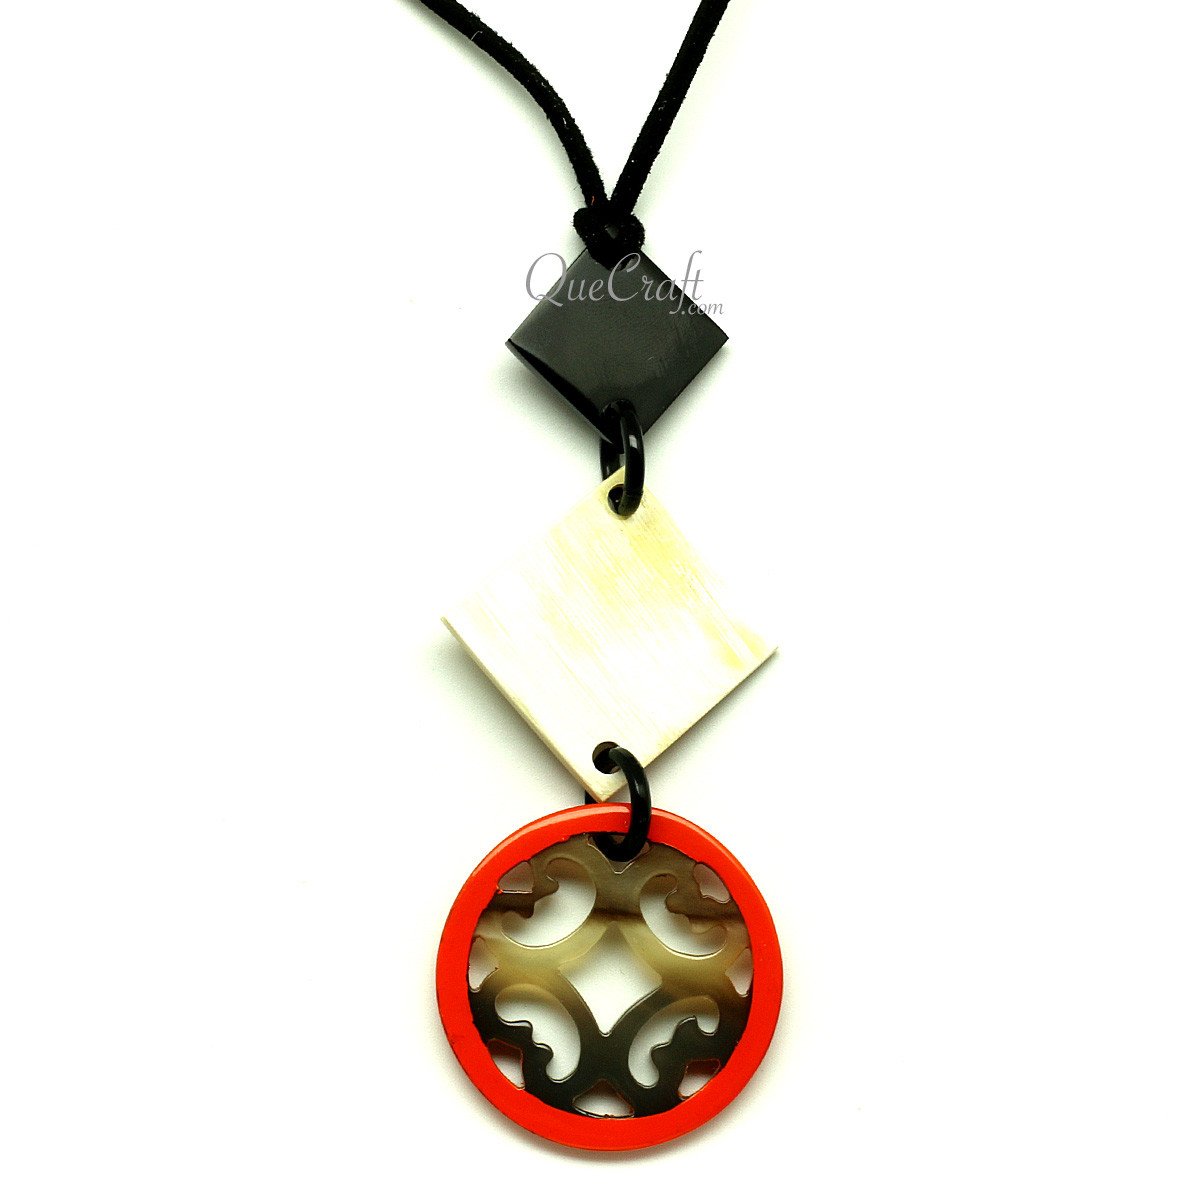 Horn & Lacquer Pendant #12860 - HORN JEWELRY